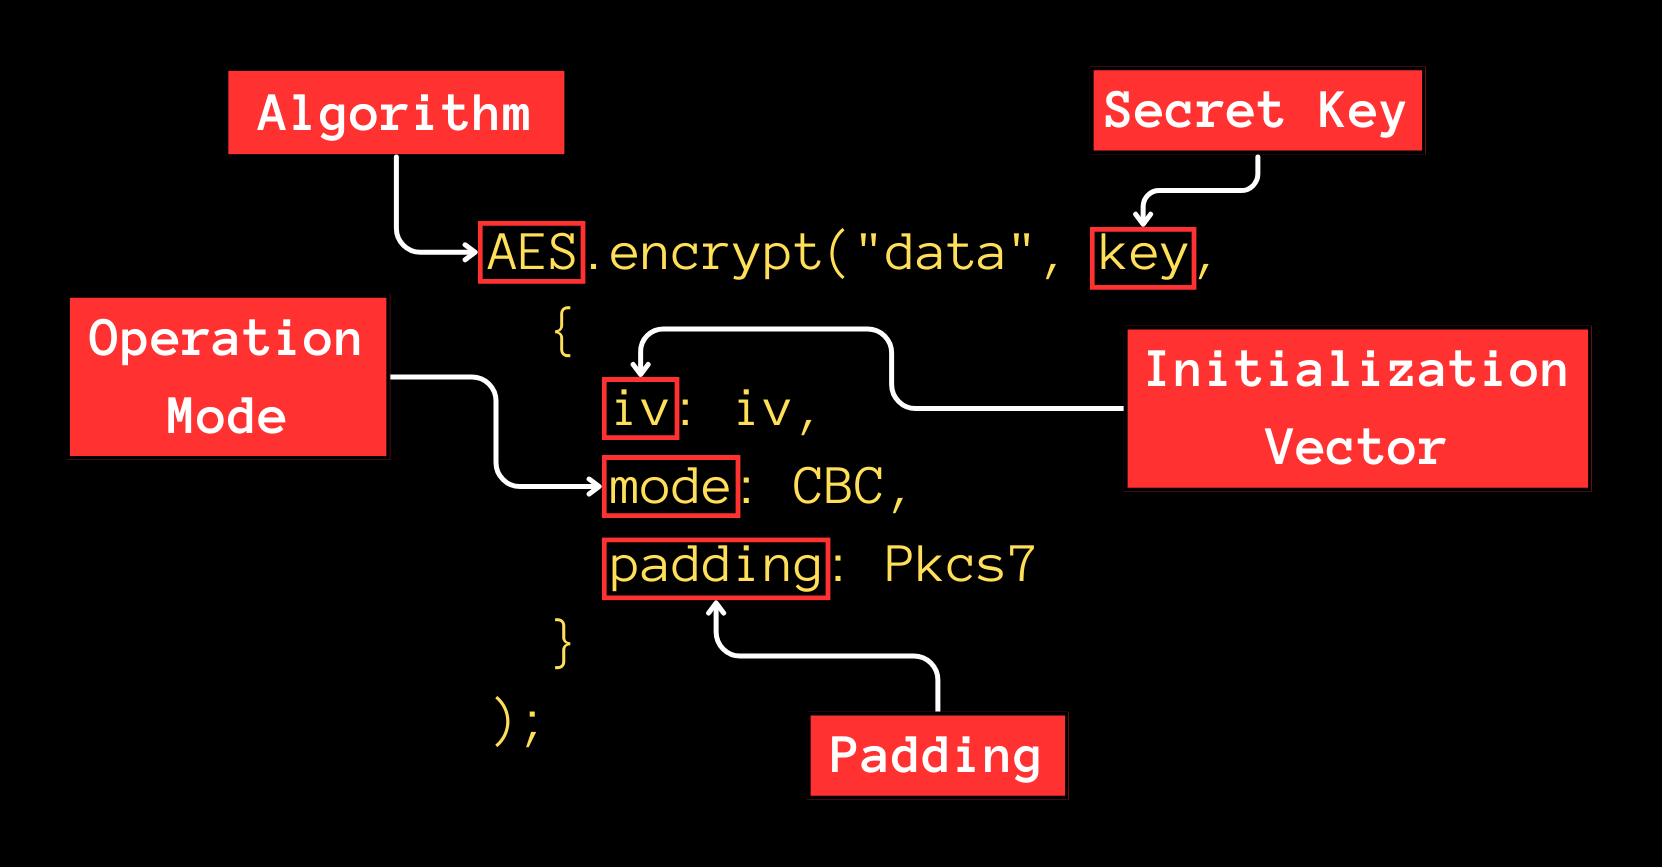 AES Encryption Function using CBC Mode